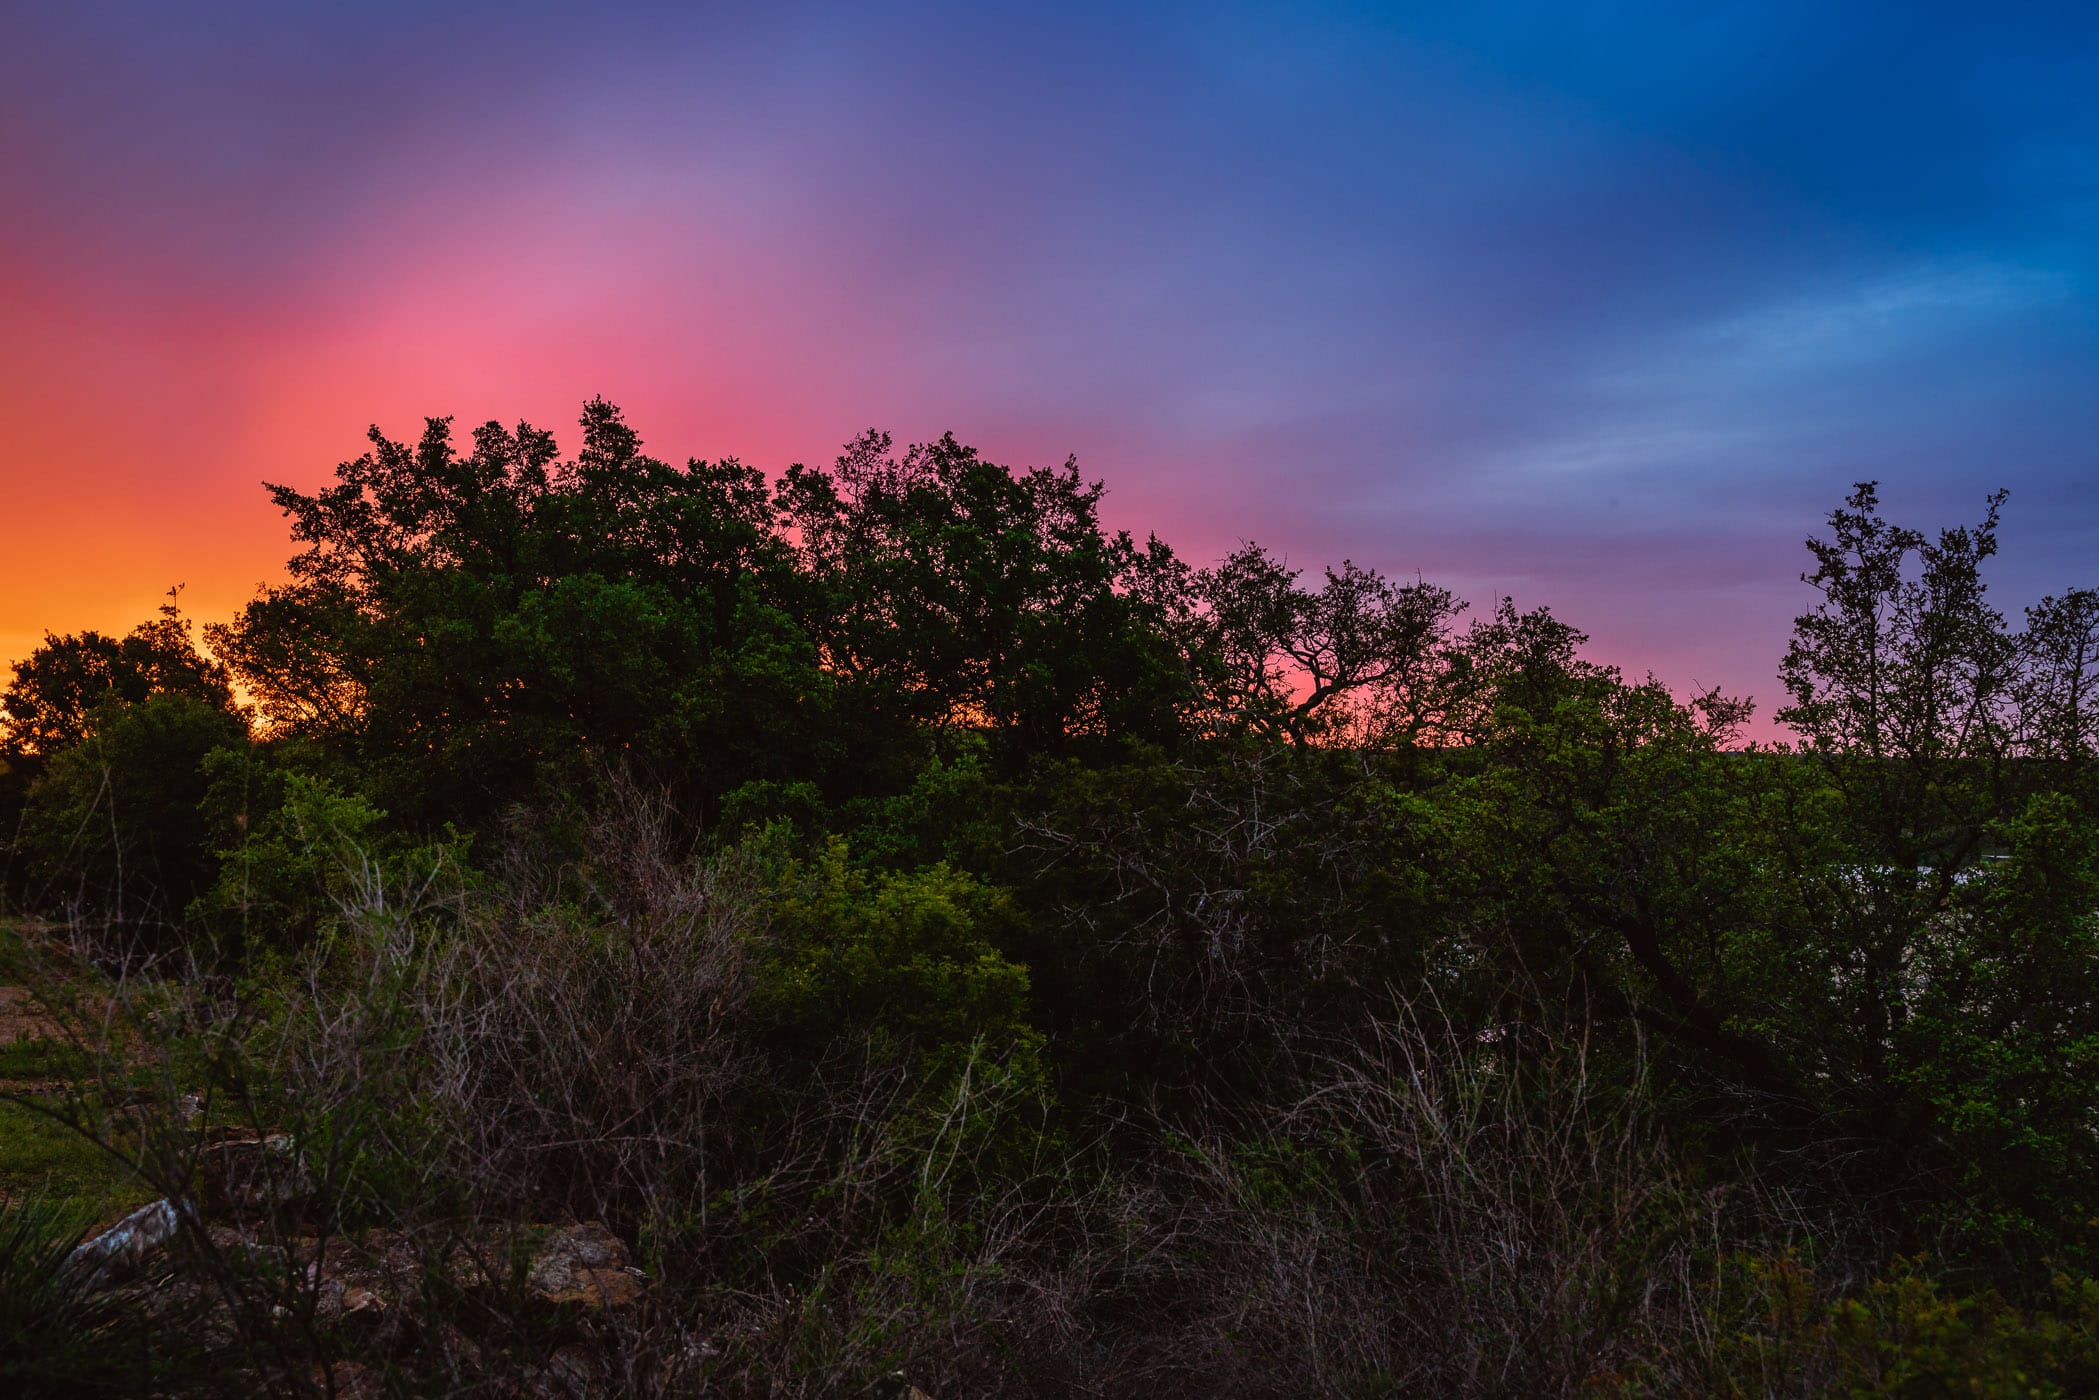 The sun sets on a grove of trees on a bluff above the Llano River near Mason, Texas.